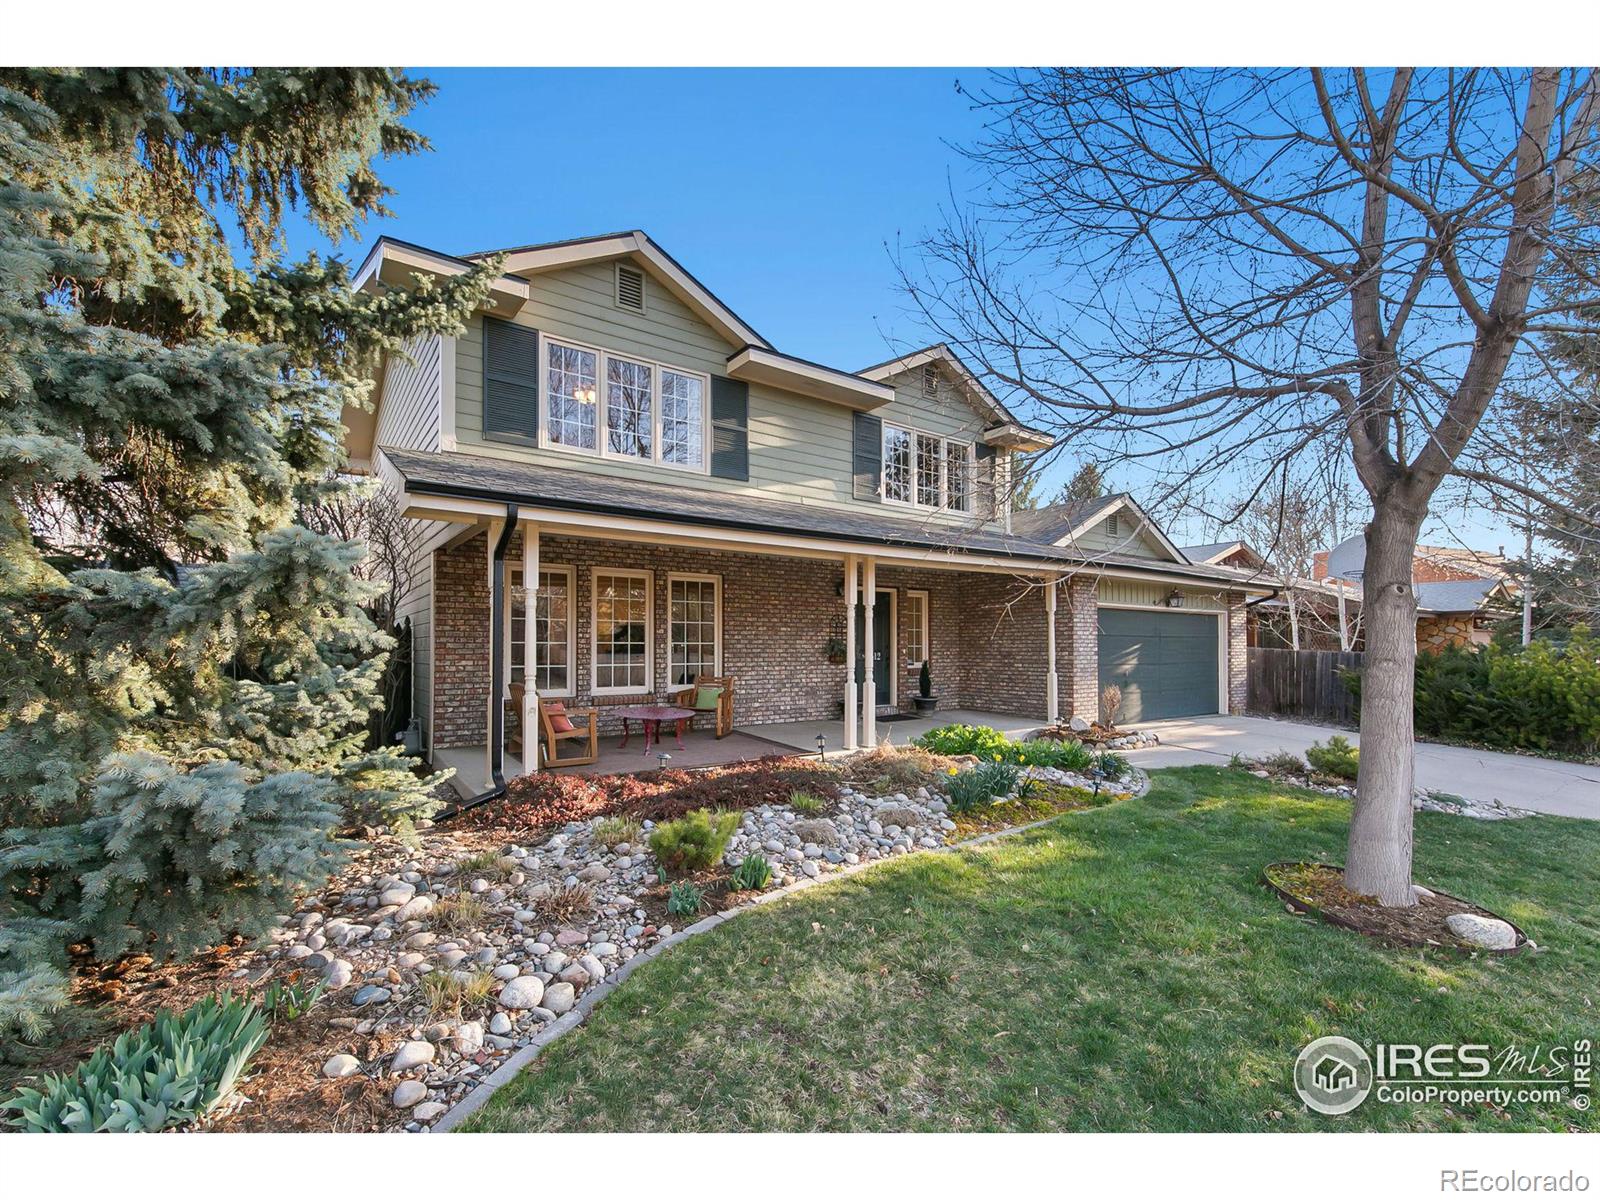 1612  Tanglewood Drive, fort collins MLS: 4567891006328 Beds: 4 Baths: 4 Price: $729,000